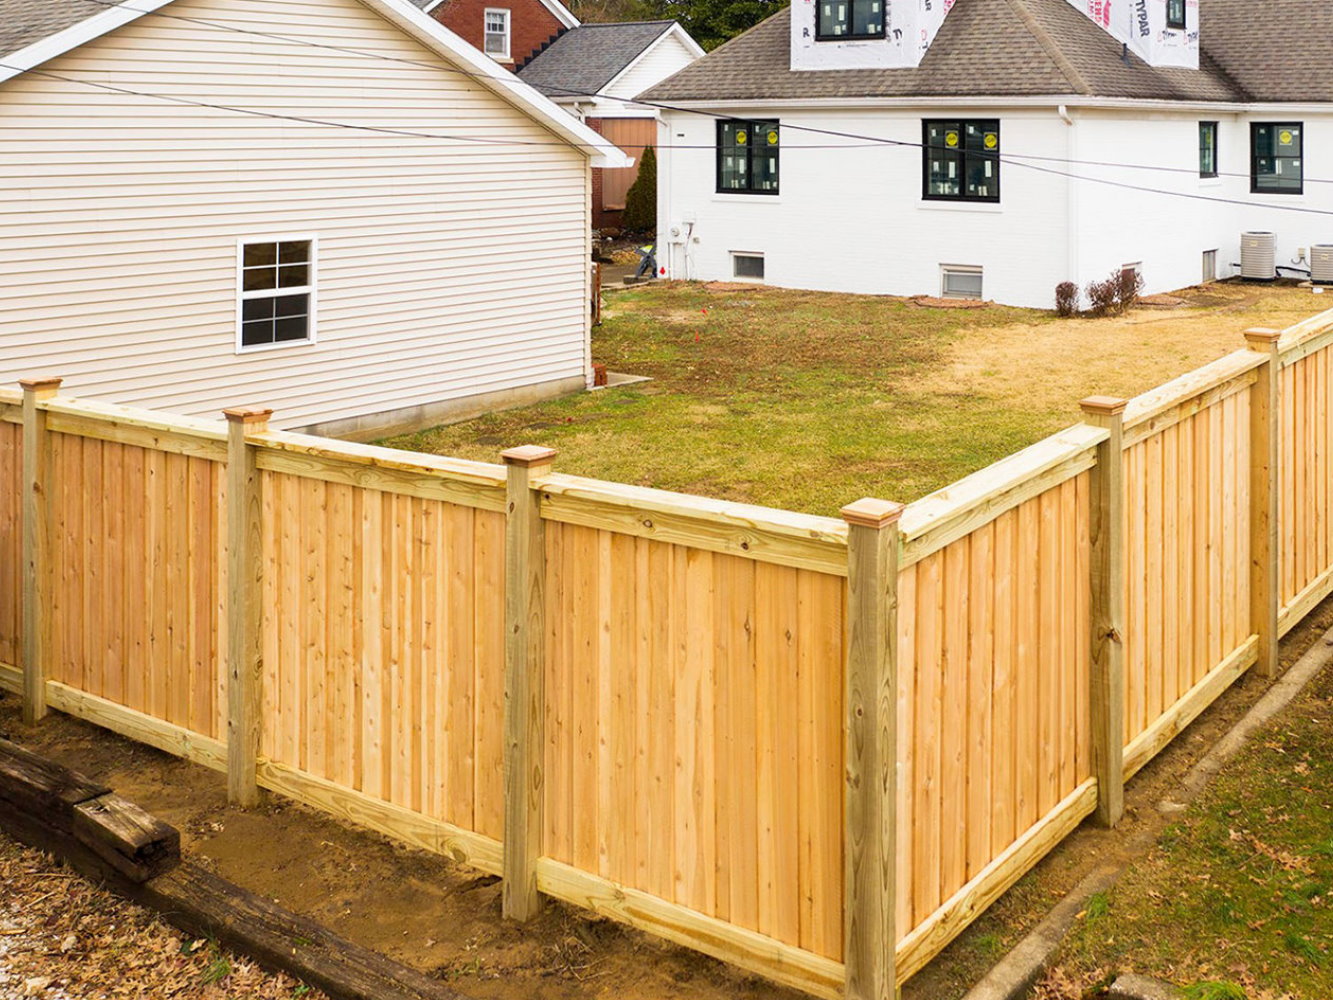 Grandview IN cap and trim style wood fence